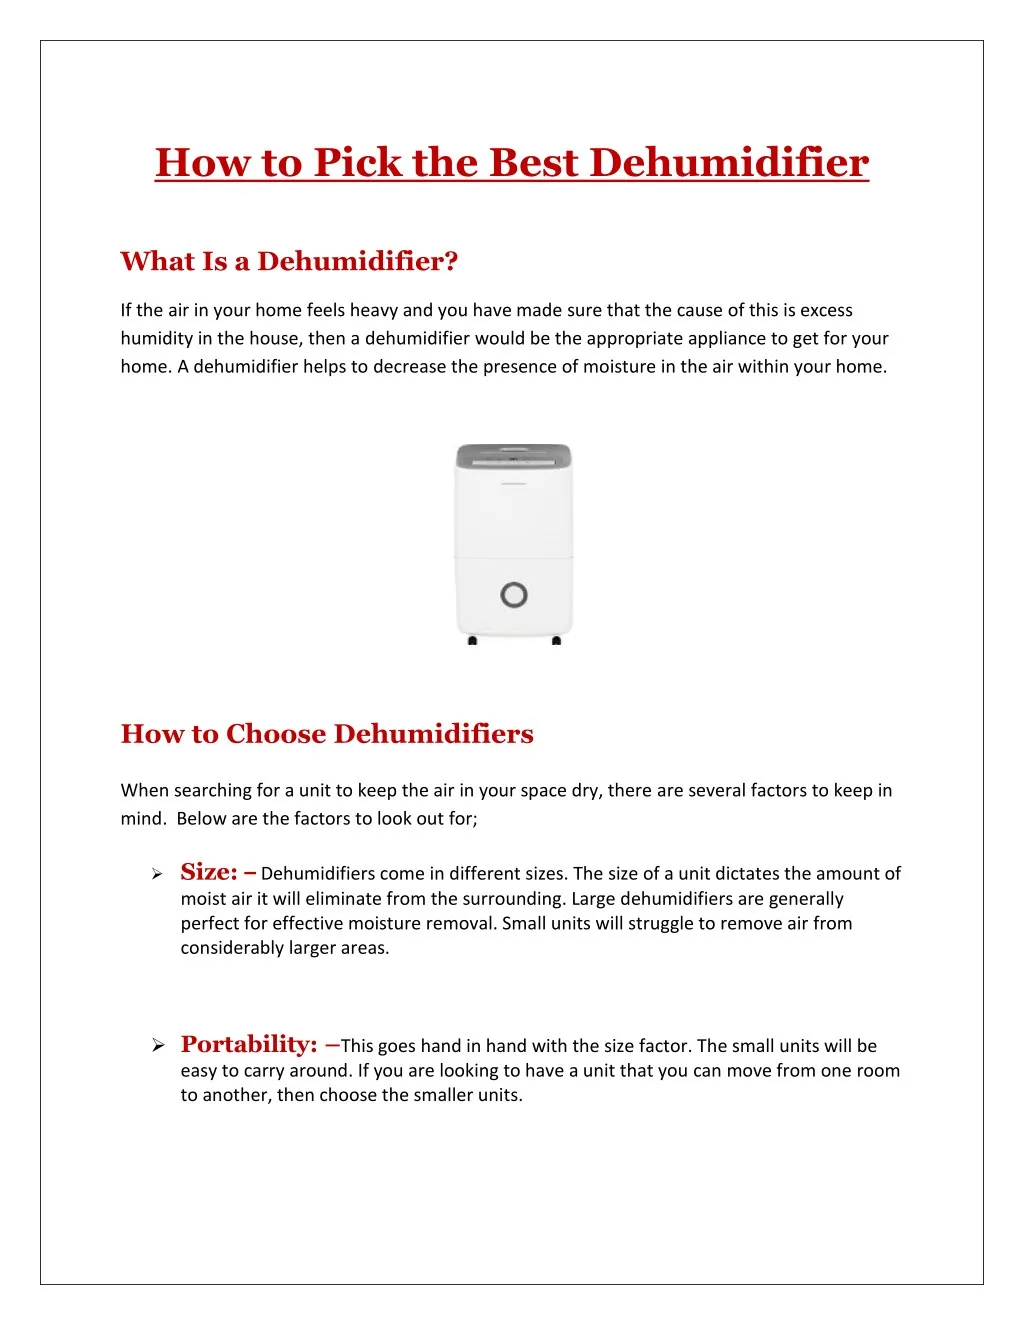 how to pick the best dehumidifier